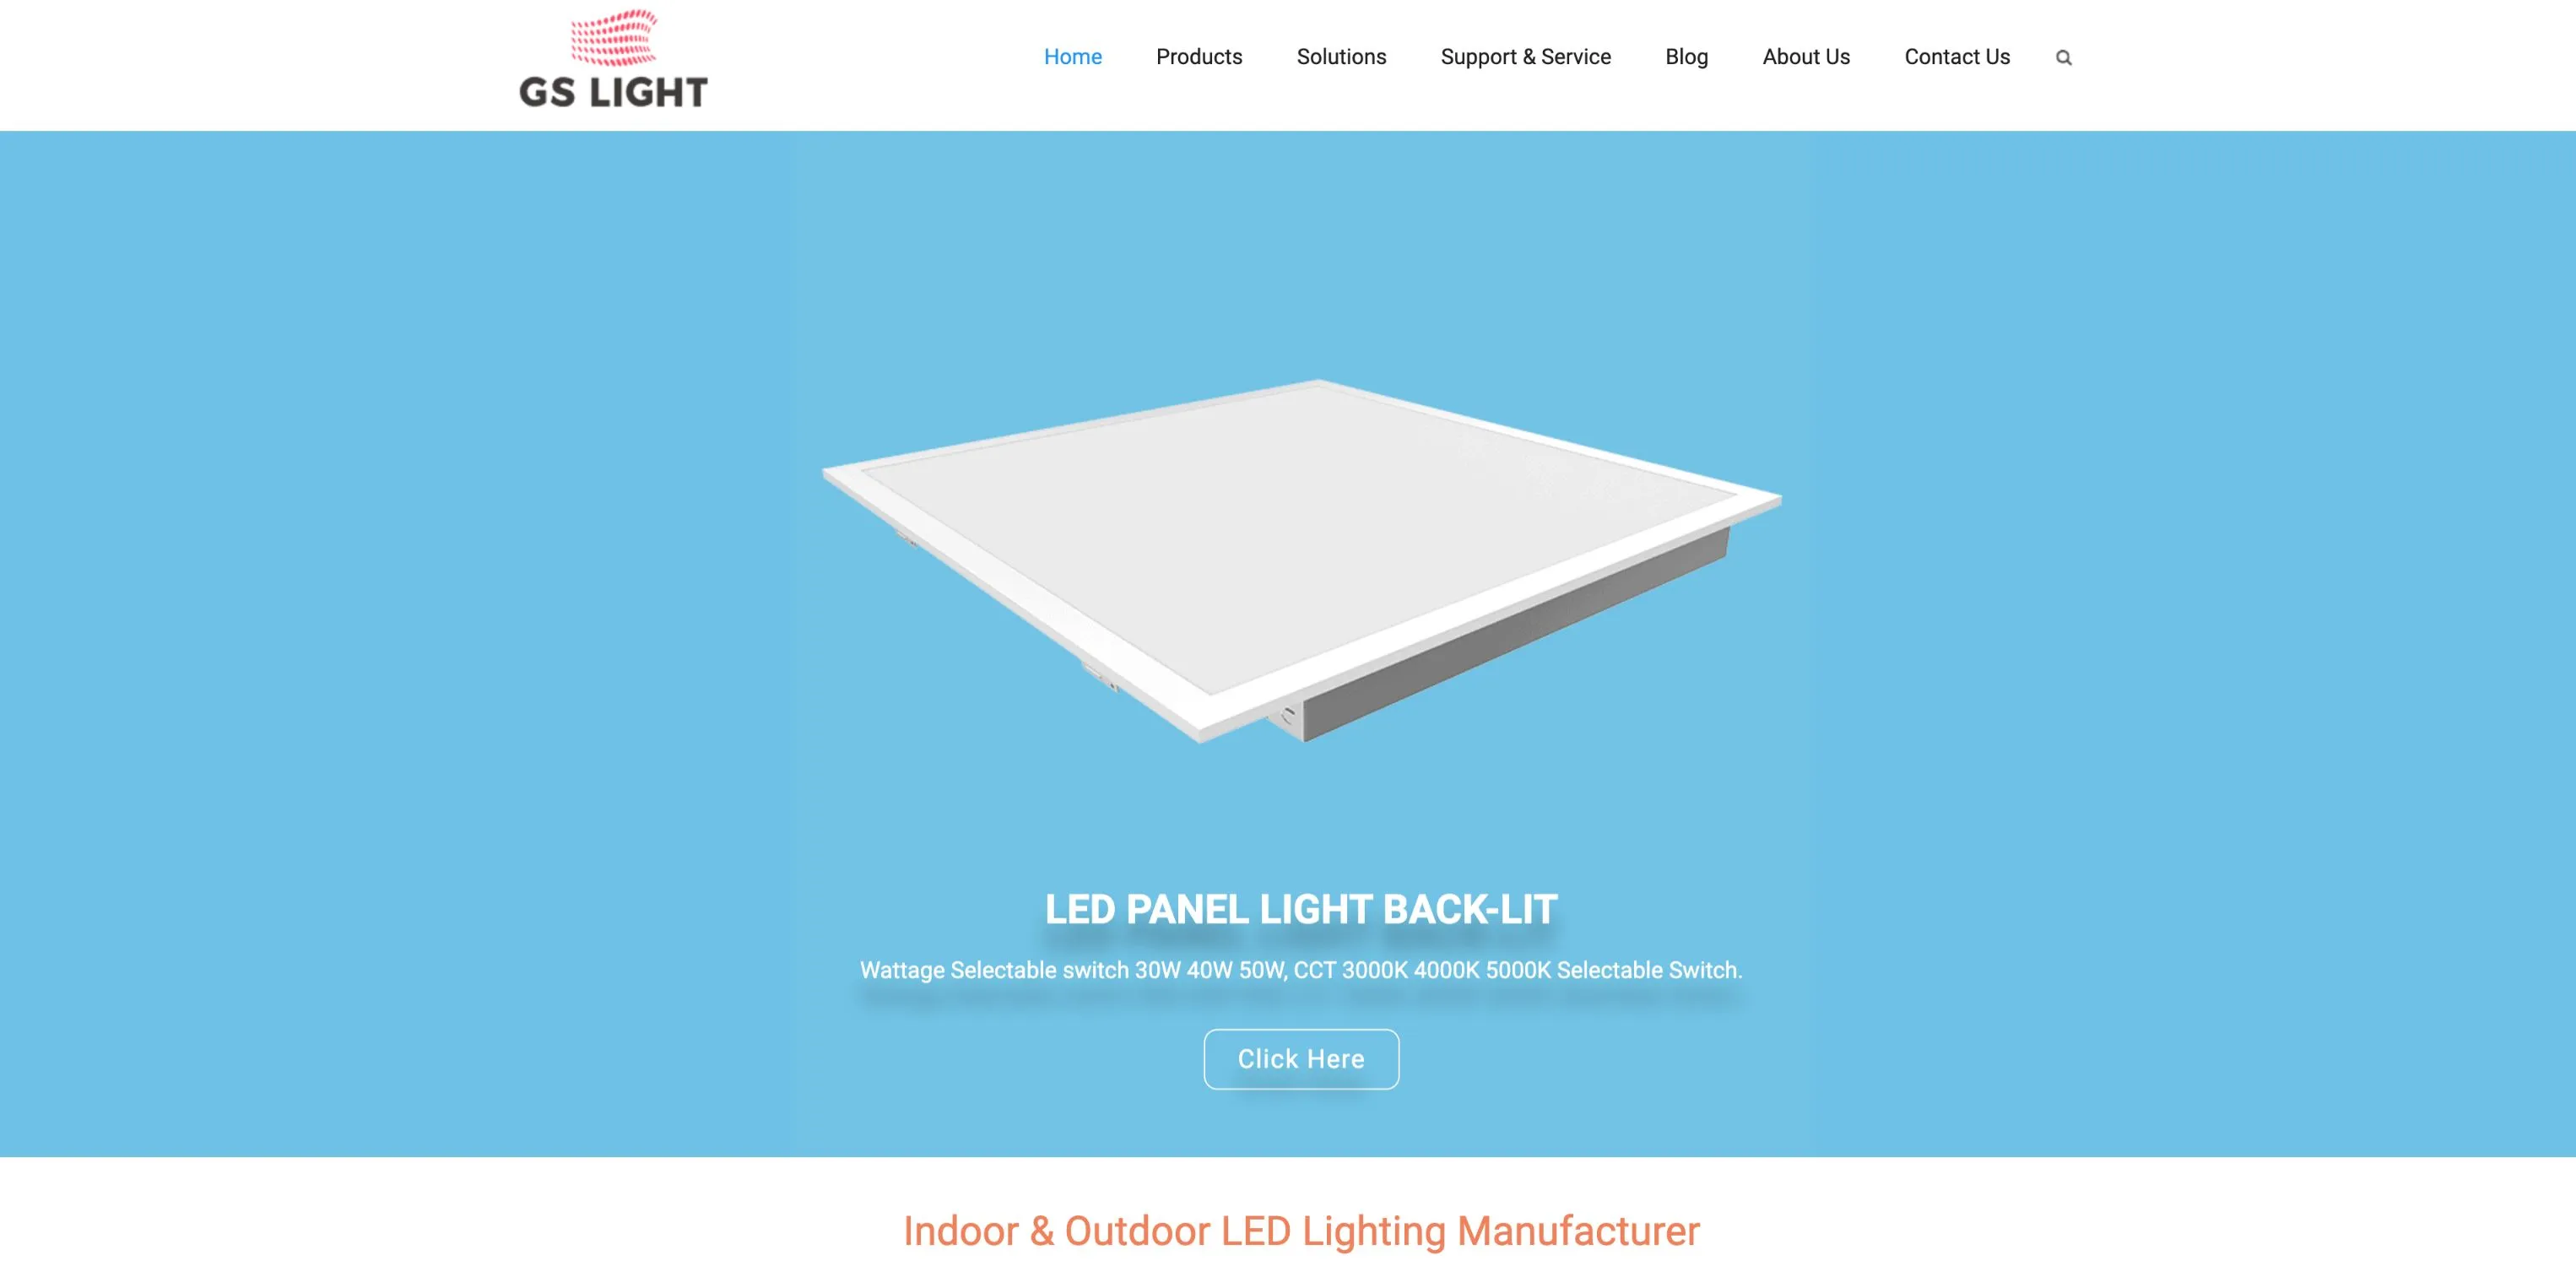 Check out the stylish LED wall light product page on GS LIGHT company website